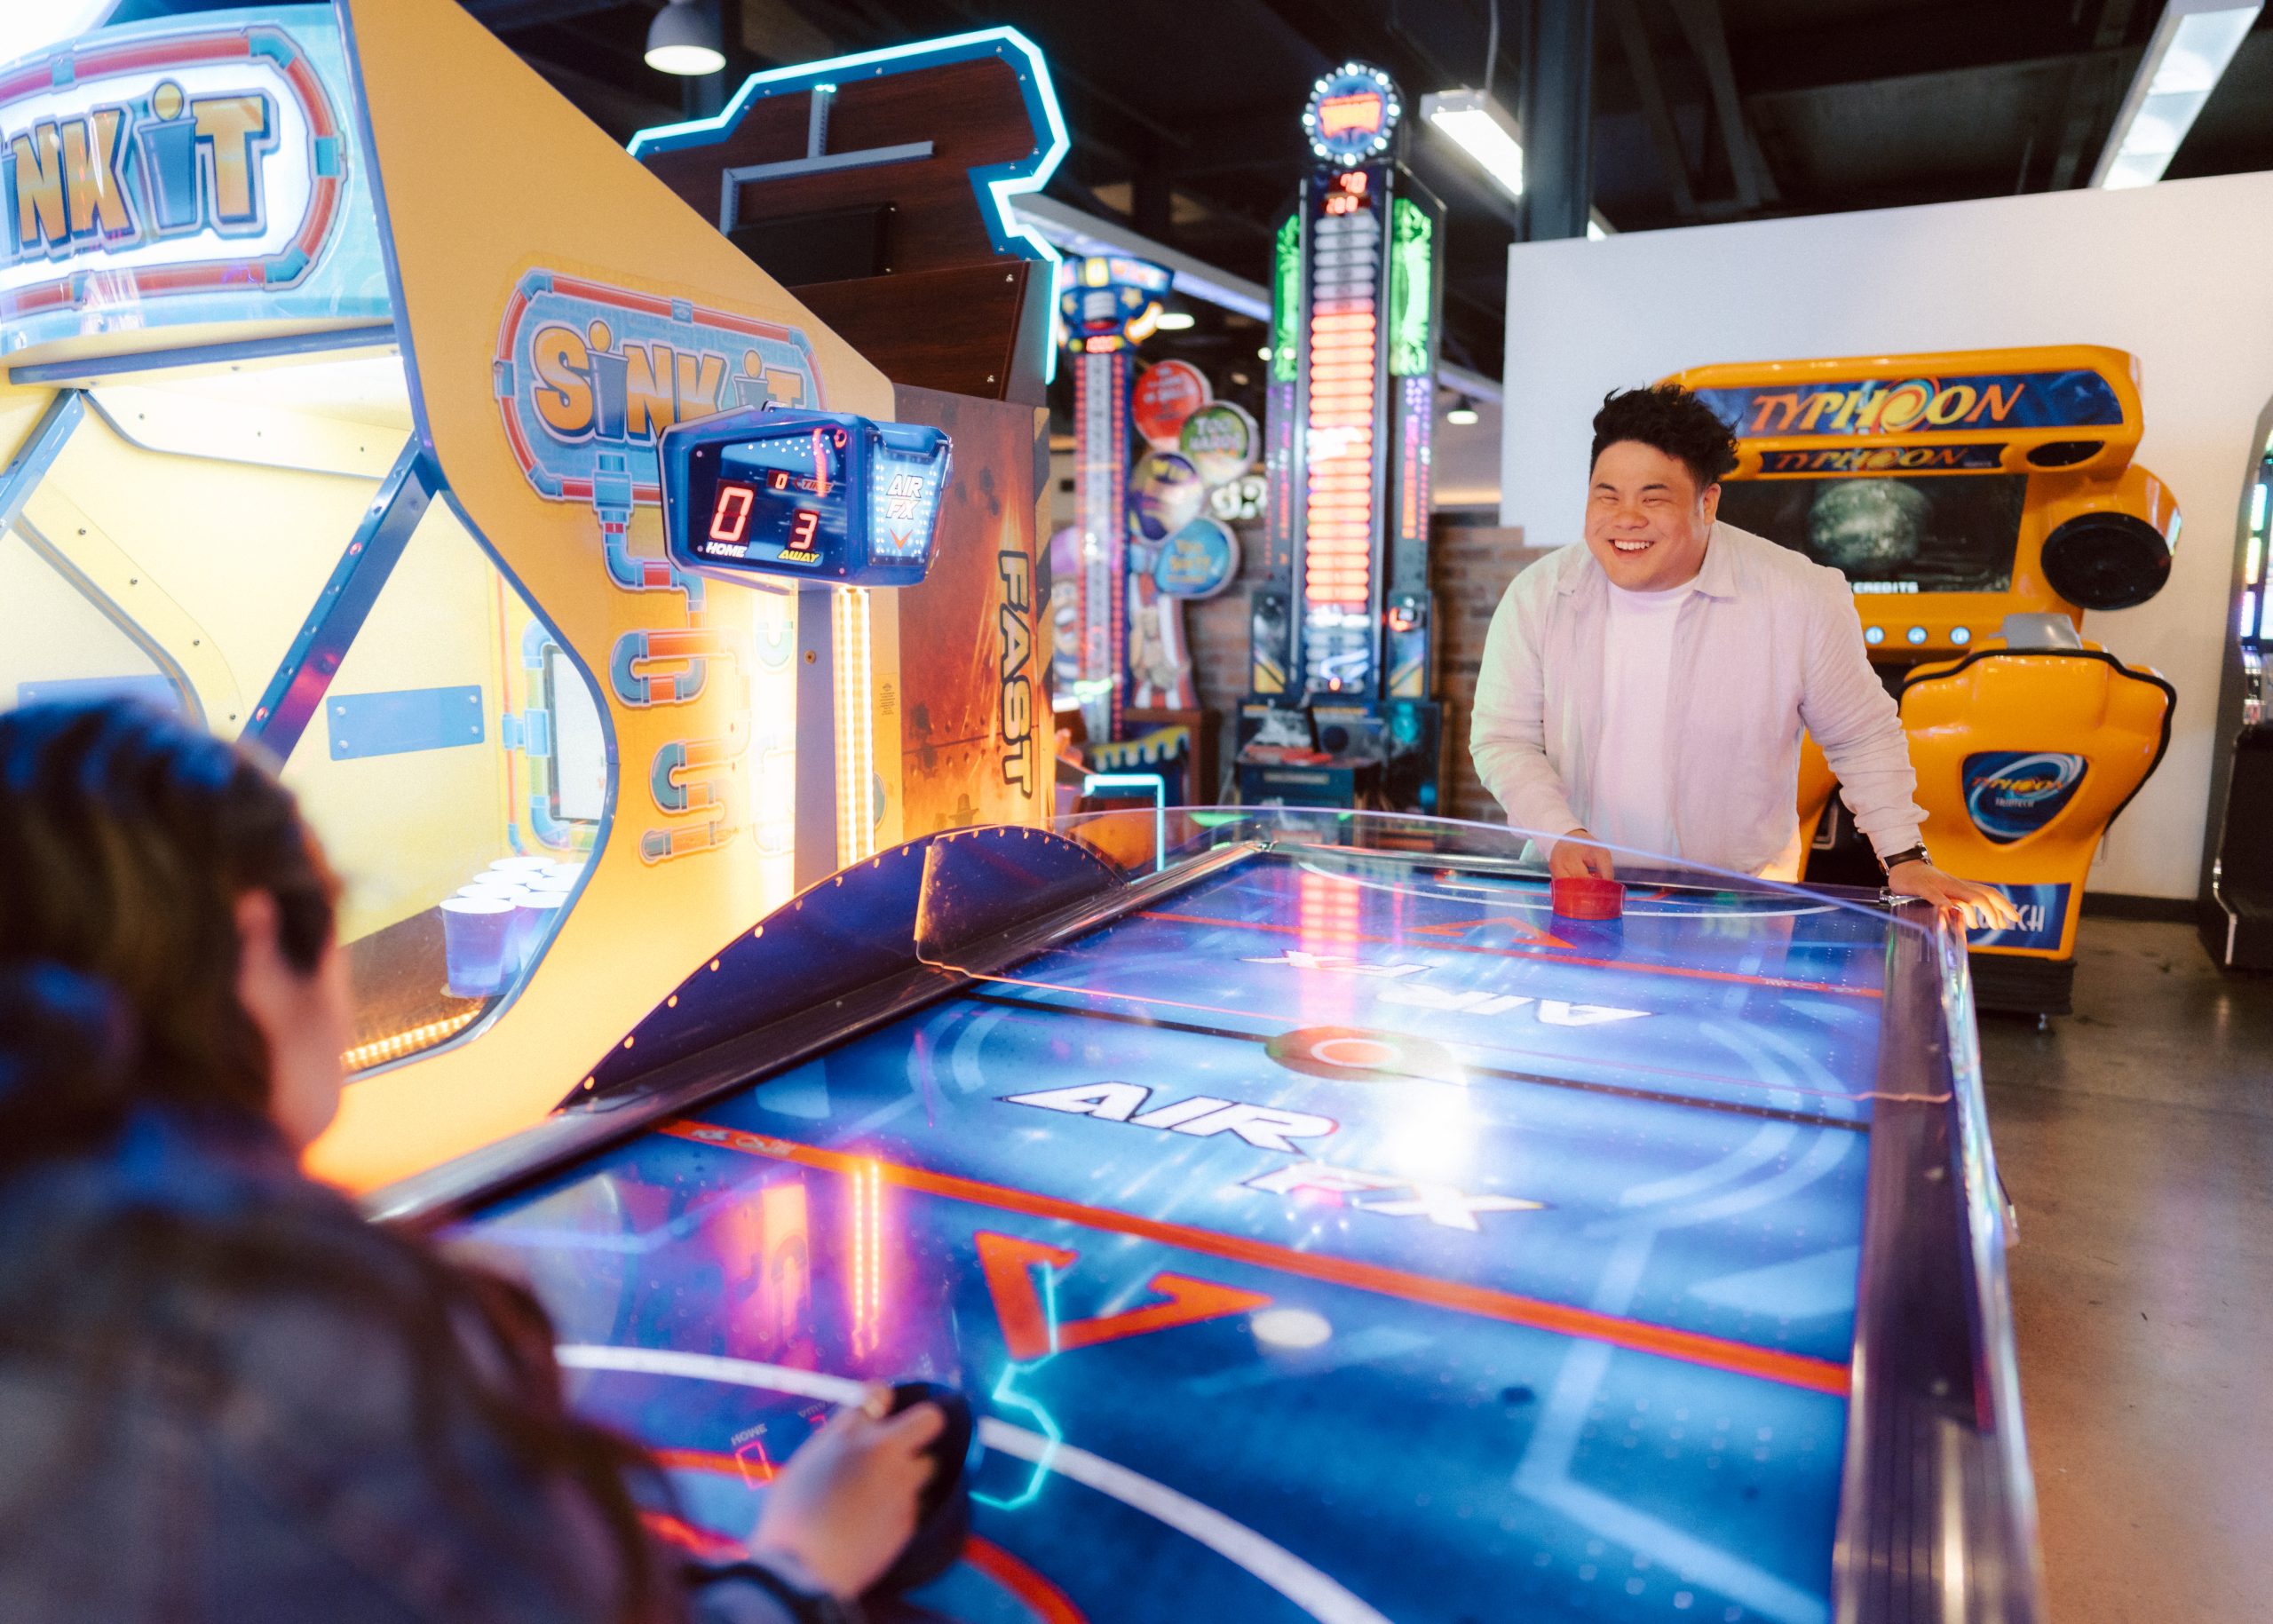 Couple in an arcade playing air hockey.